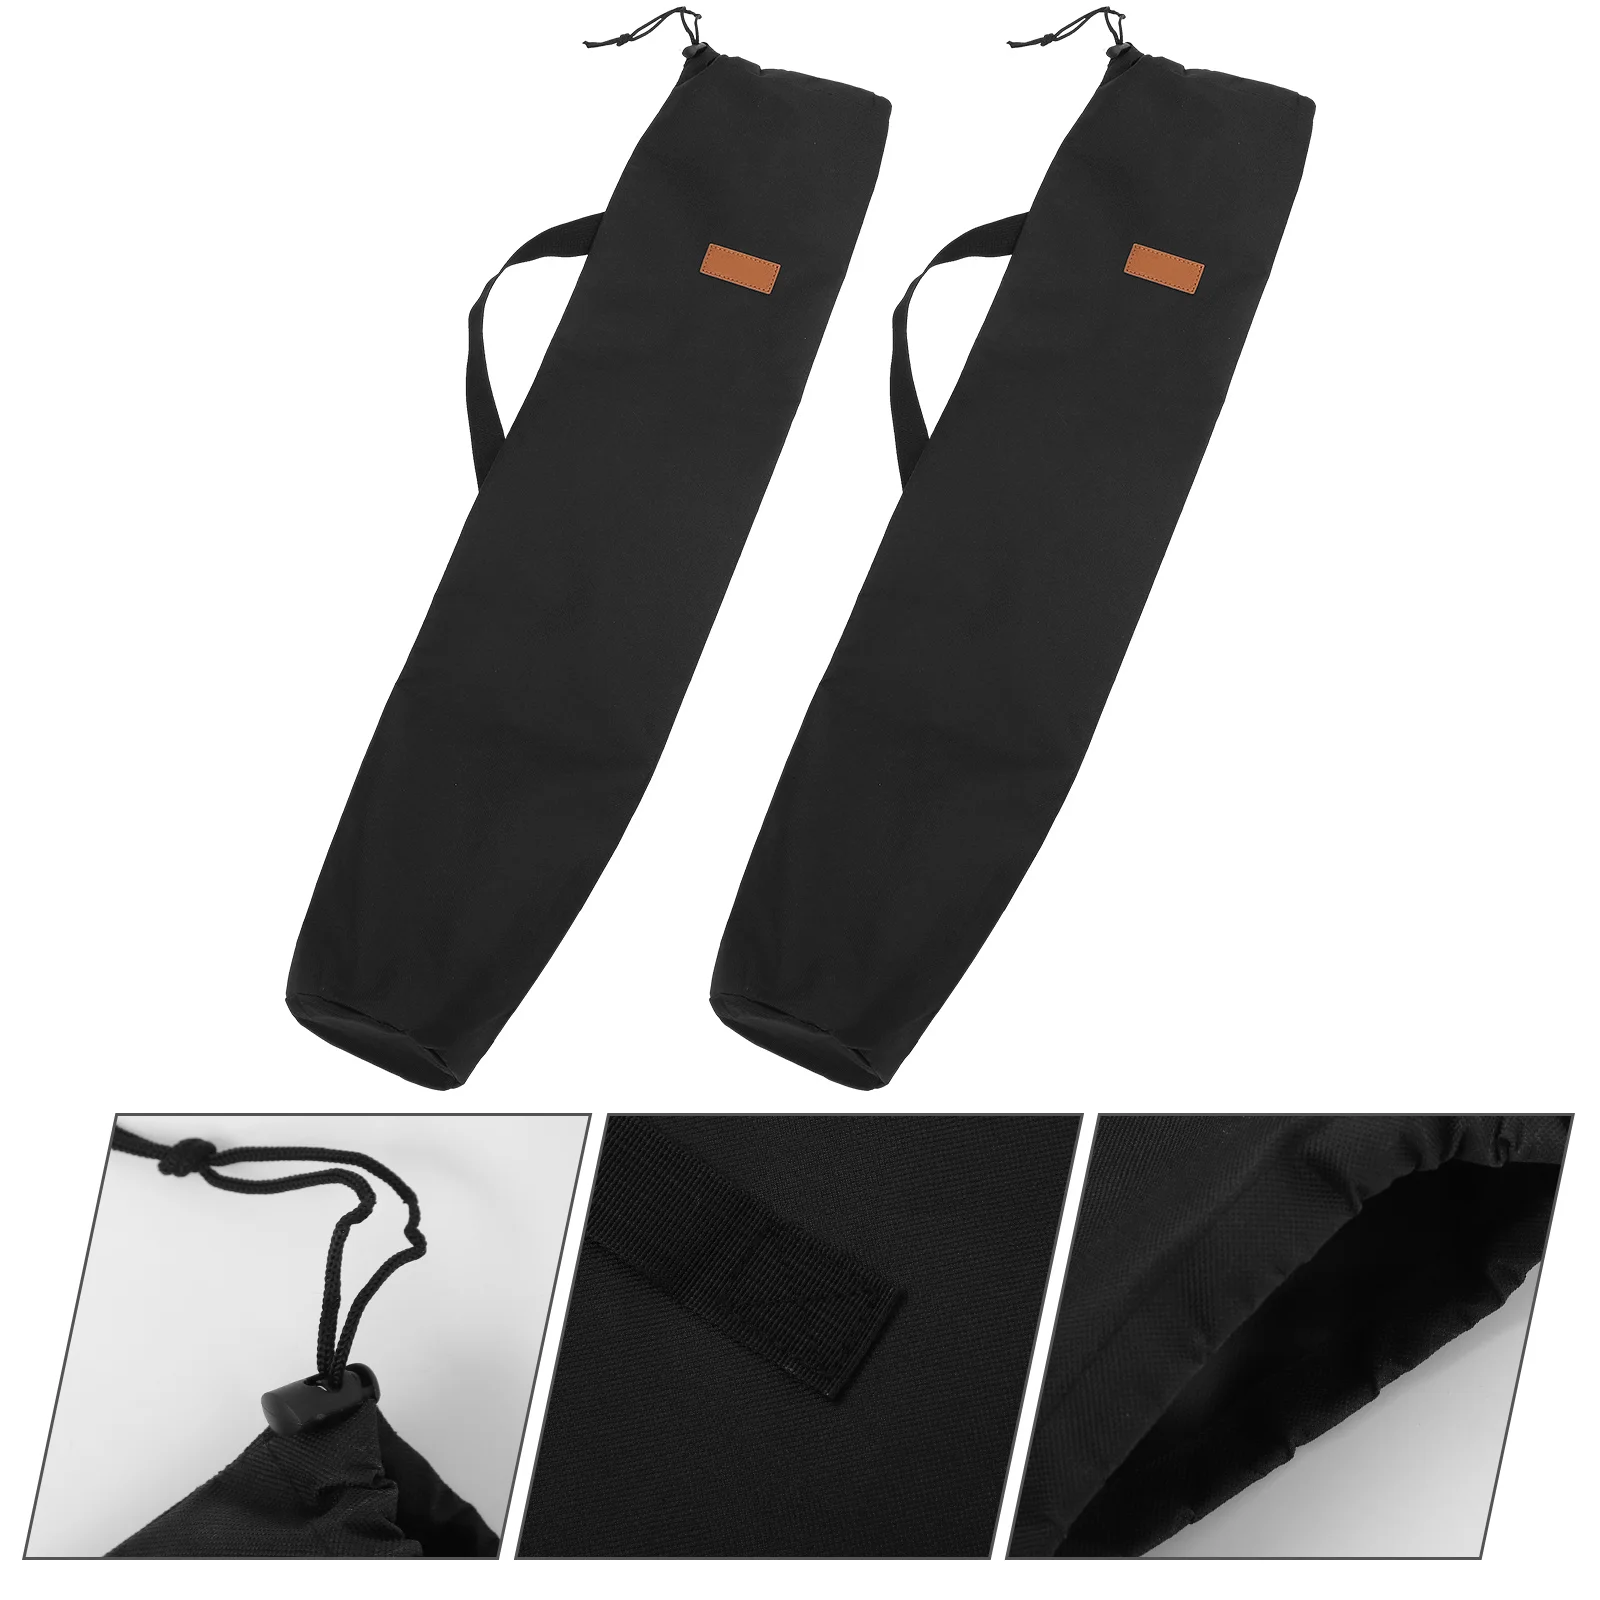 

2 Pcs Fishing Pole Carrying Bag Tent Rod Pouch Camping Storage Packing Container Decorative Handheld Outdoor Bags